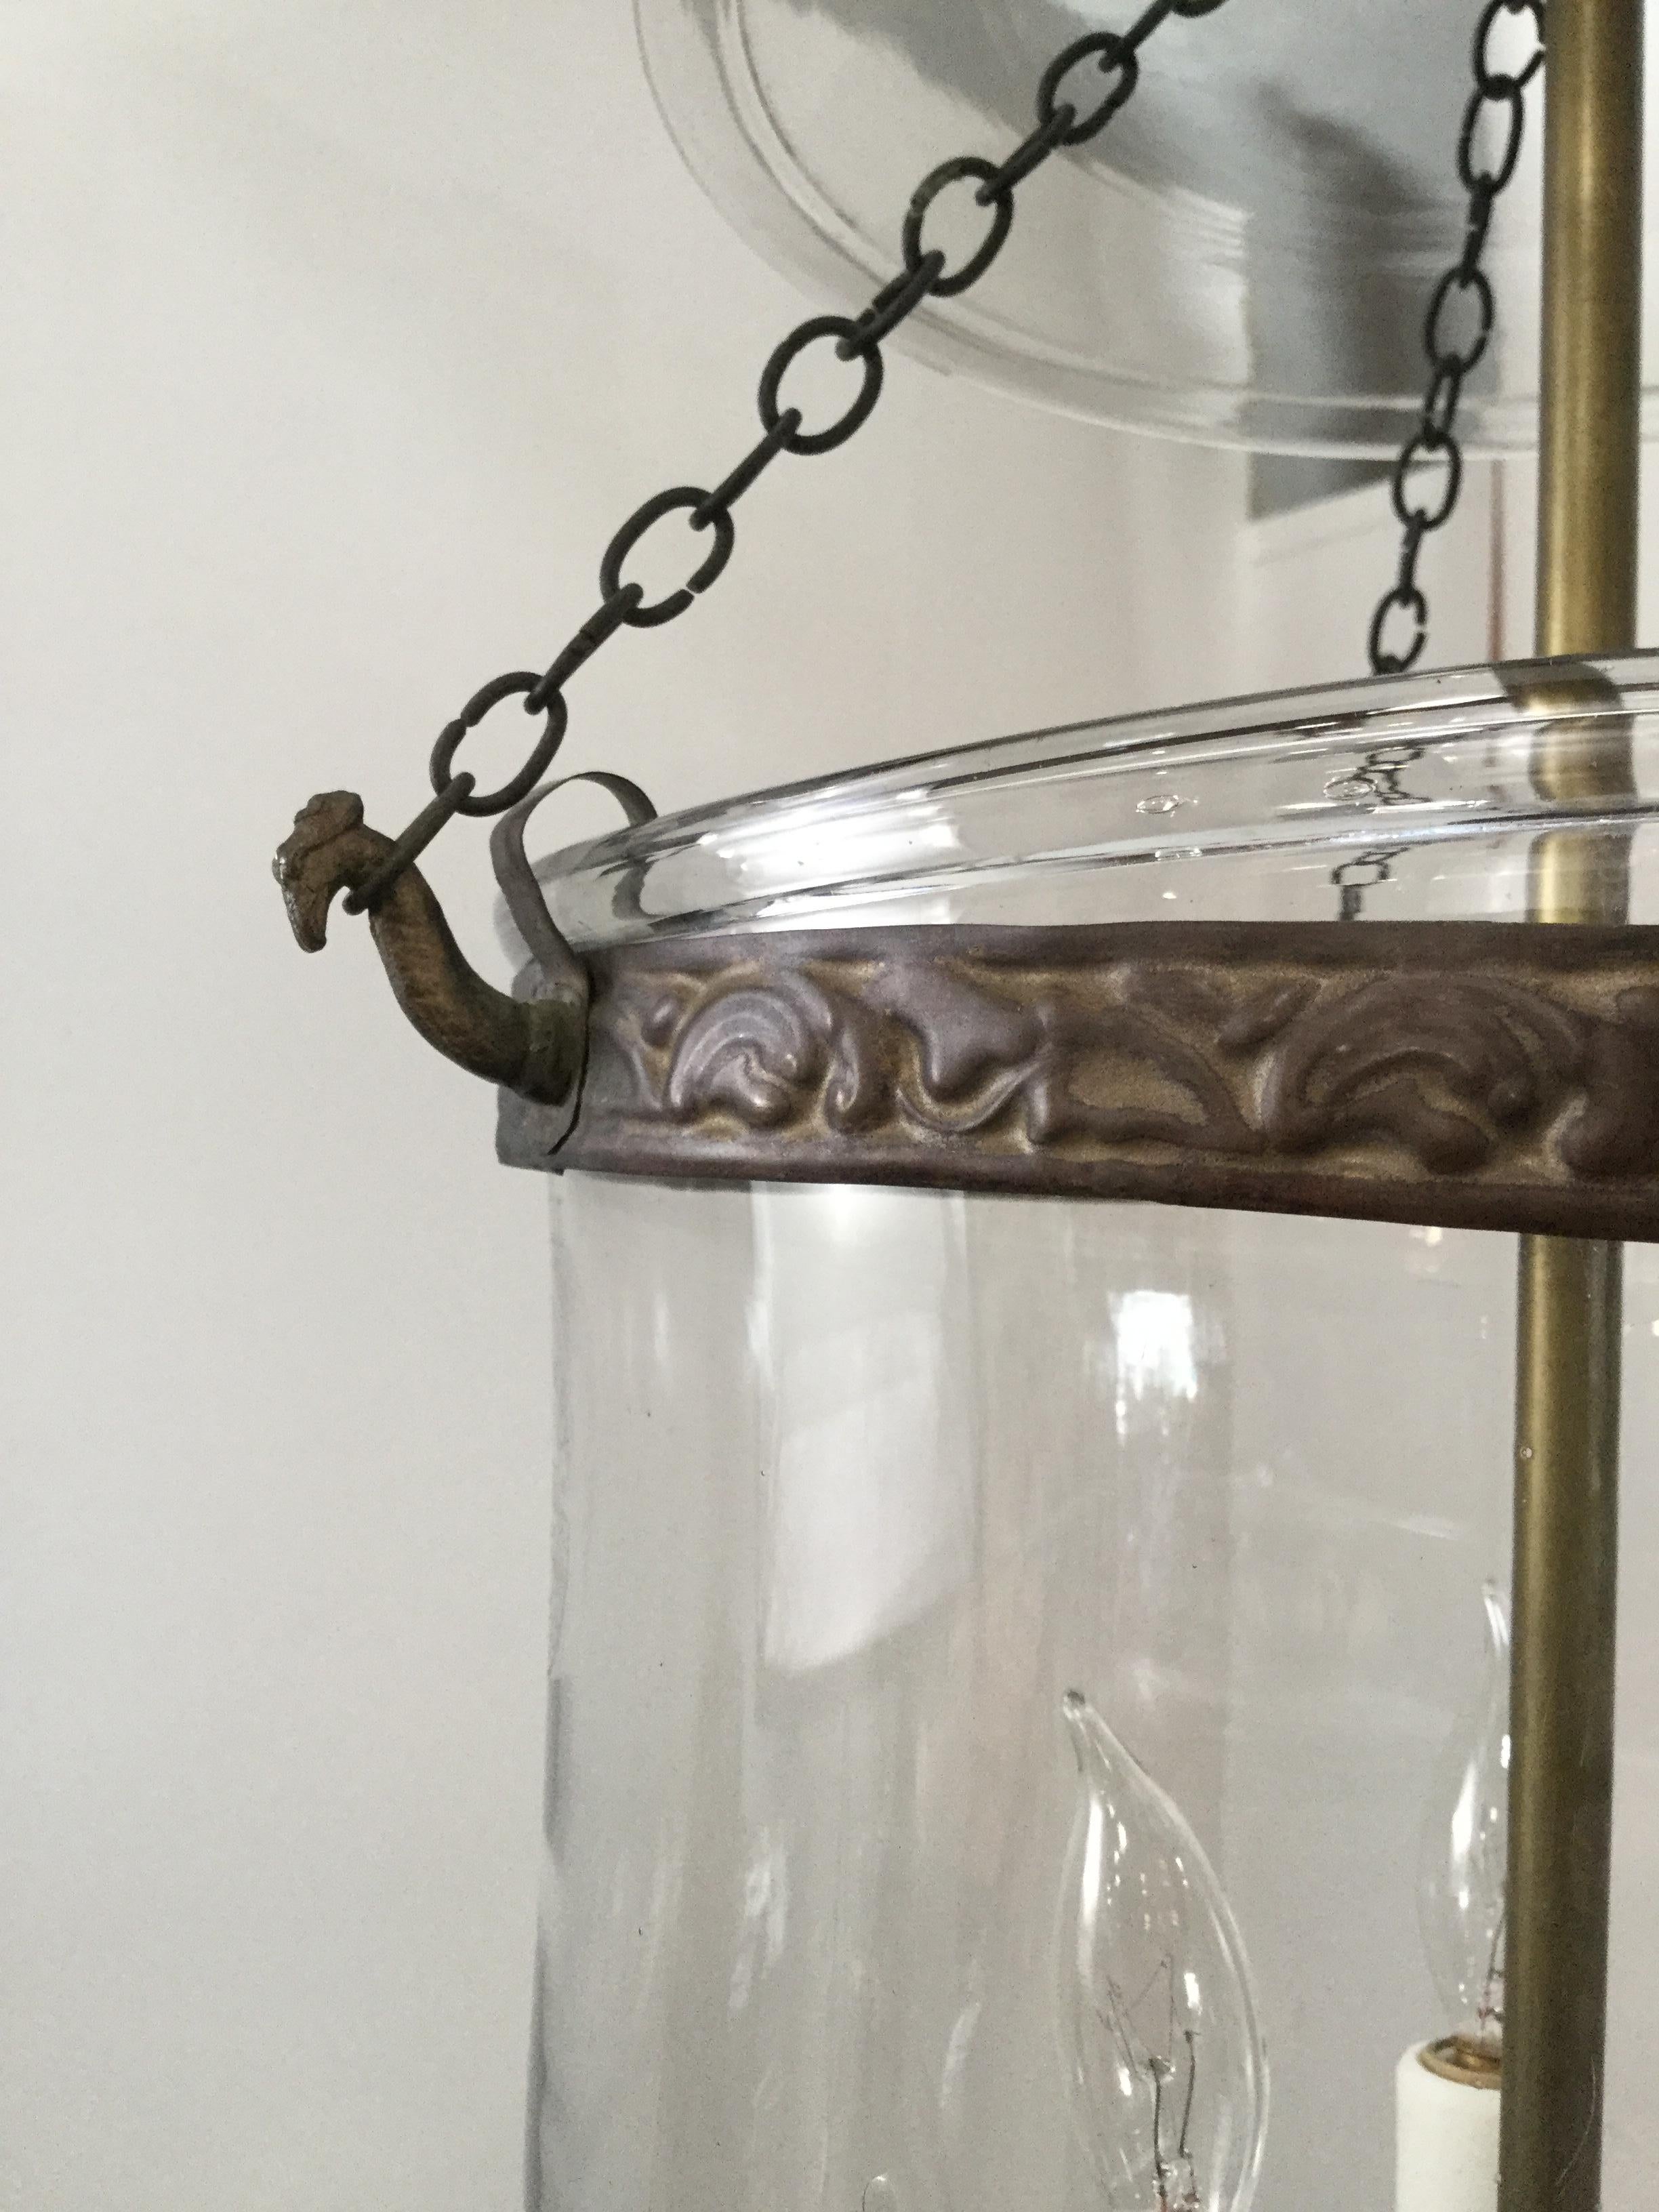 Antique Belgian Bell JarCreated by De Grelle Val St. Lambert in 1890 Belgium, this bell jar has been recently rewired and restored. Excellent condition and interesting hand blown glass shade.